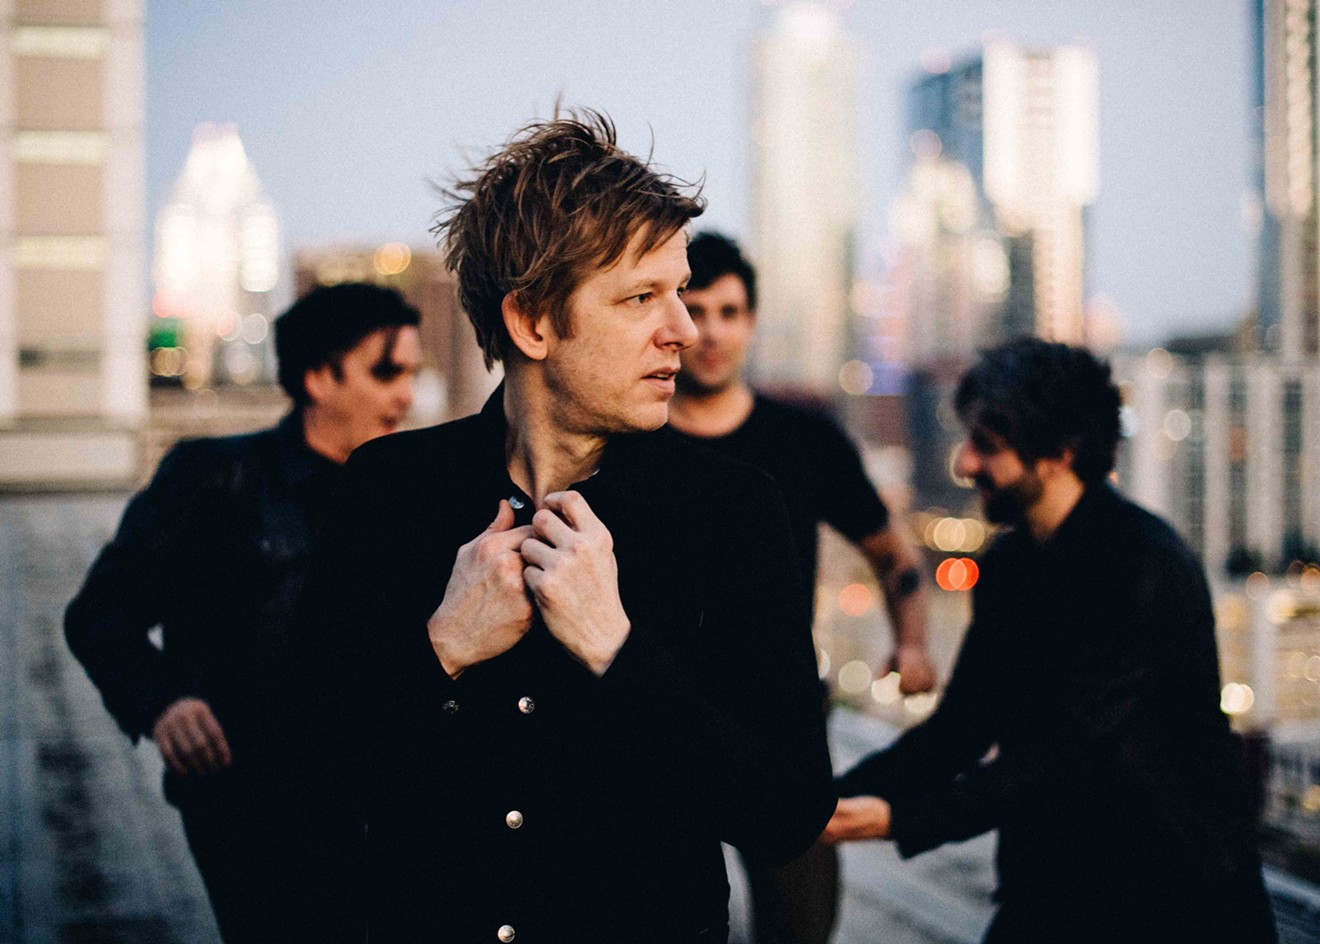 Spoon will open for Beck and Cage the Elephant when the Night Running Tour arrives in West Palm Beach.